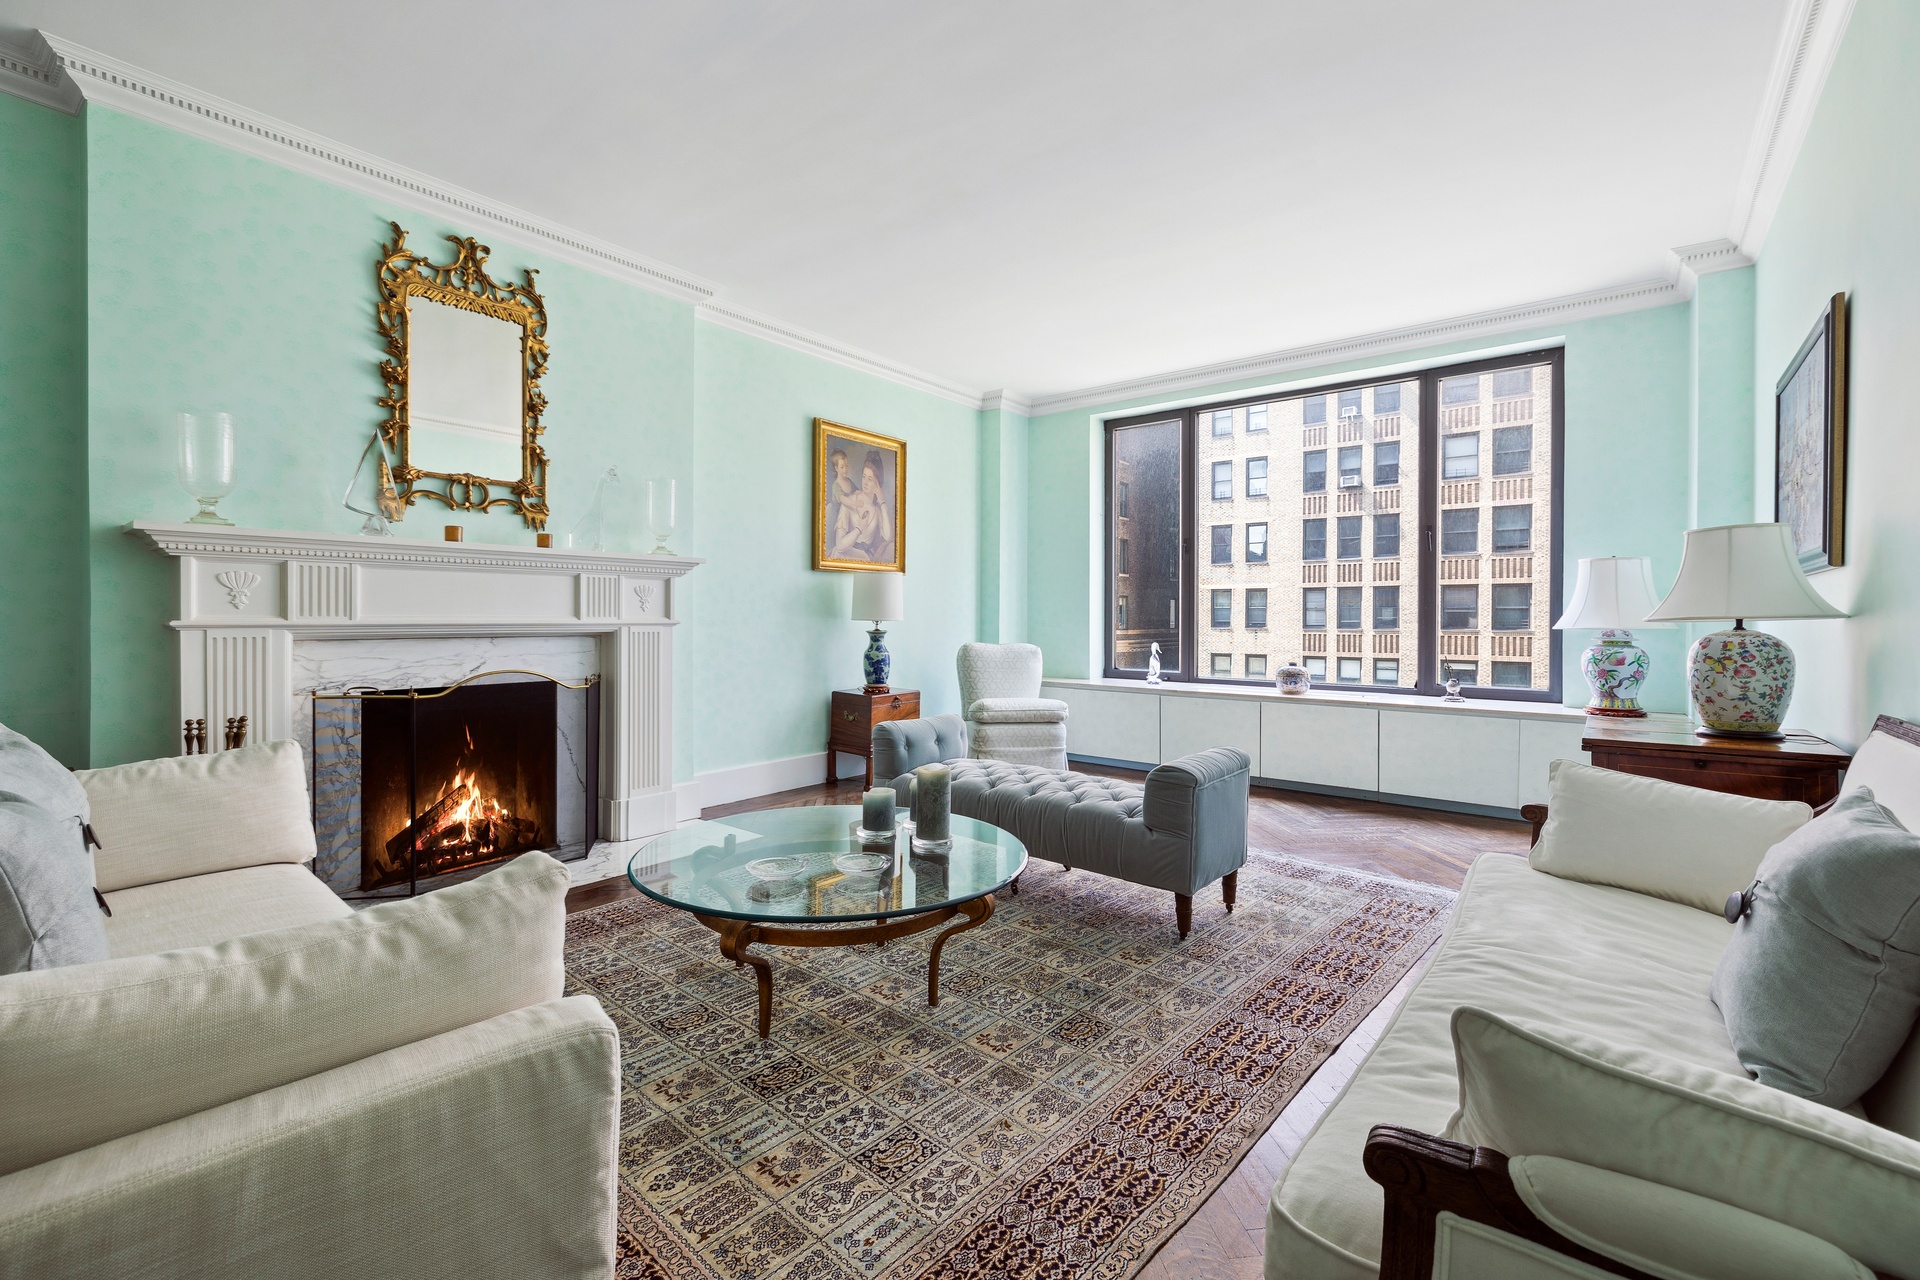 333 East 57th Street 6-A, Sutton Place, Midtown East, NYC - 5 Bedrooms  
4 Bathrooms  
9 Rooms - 